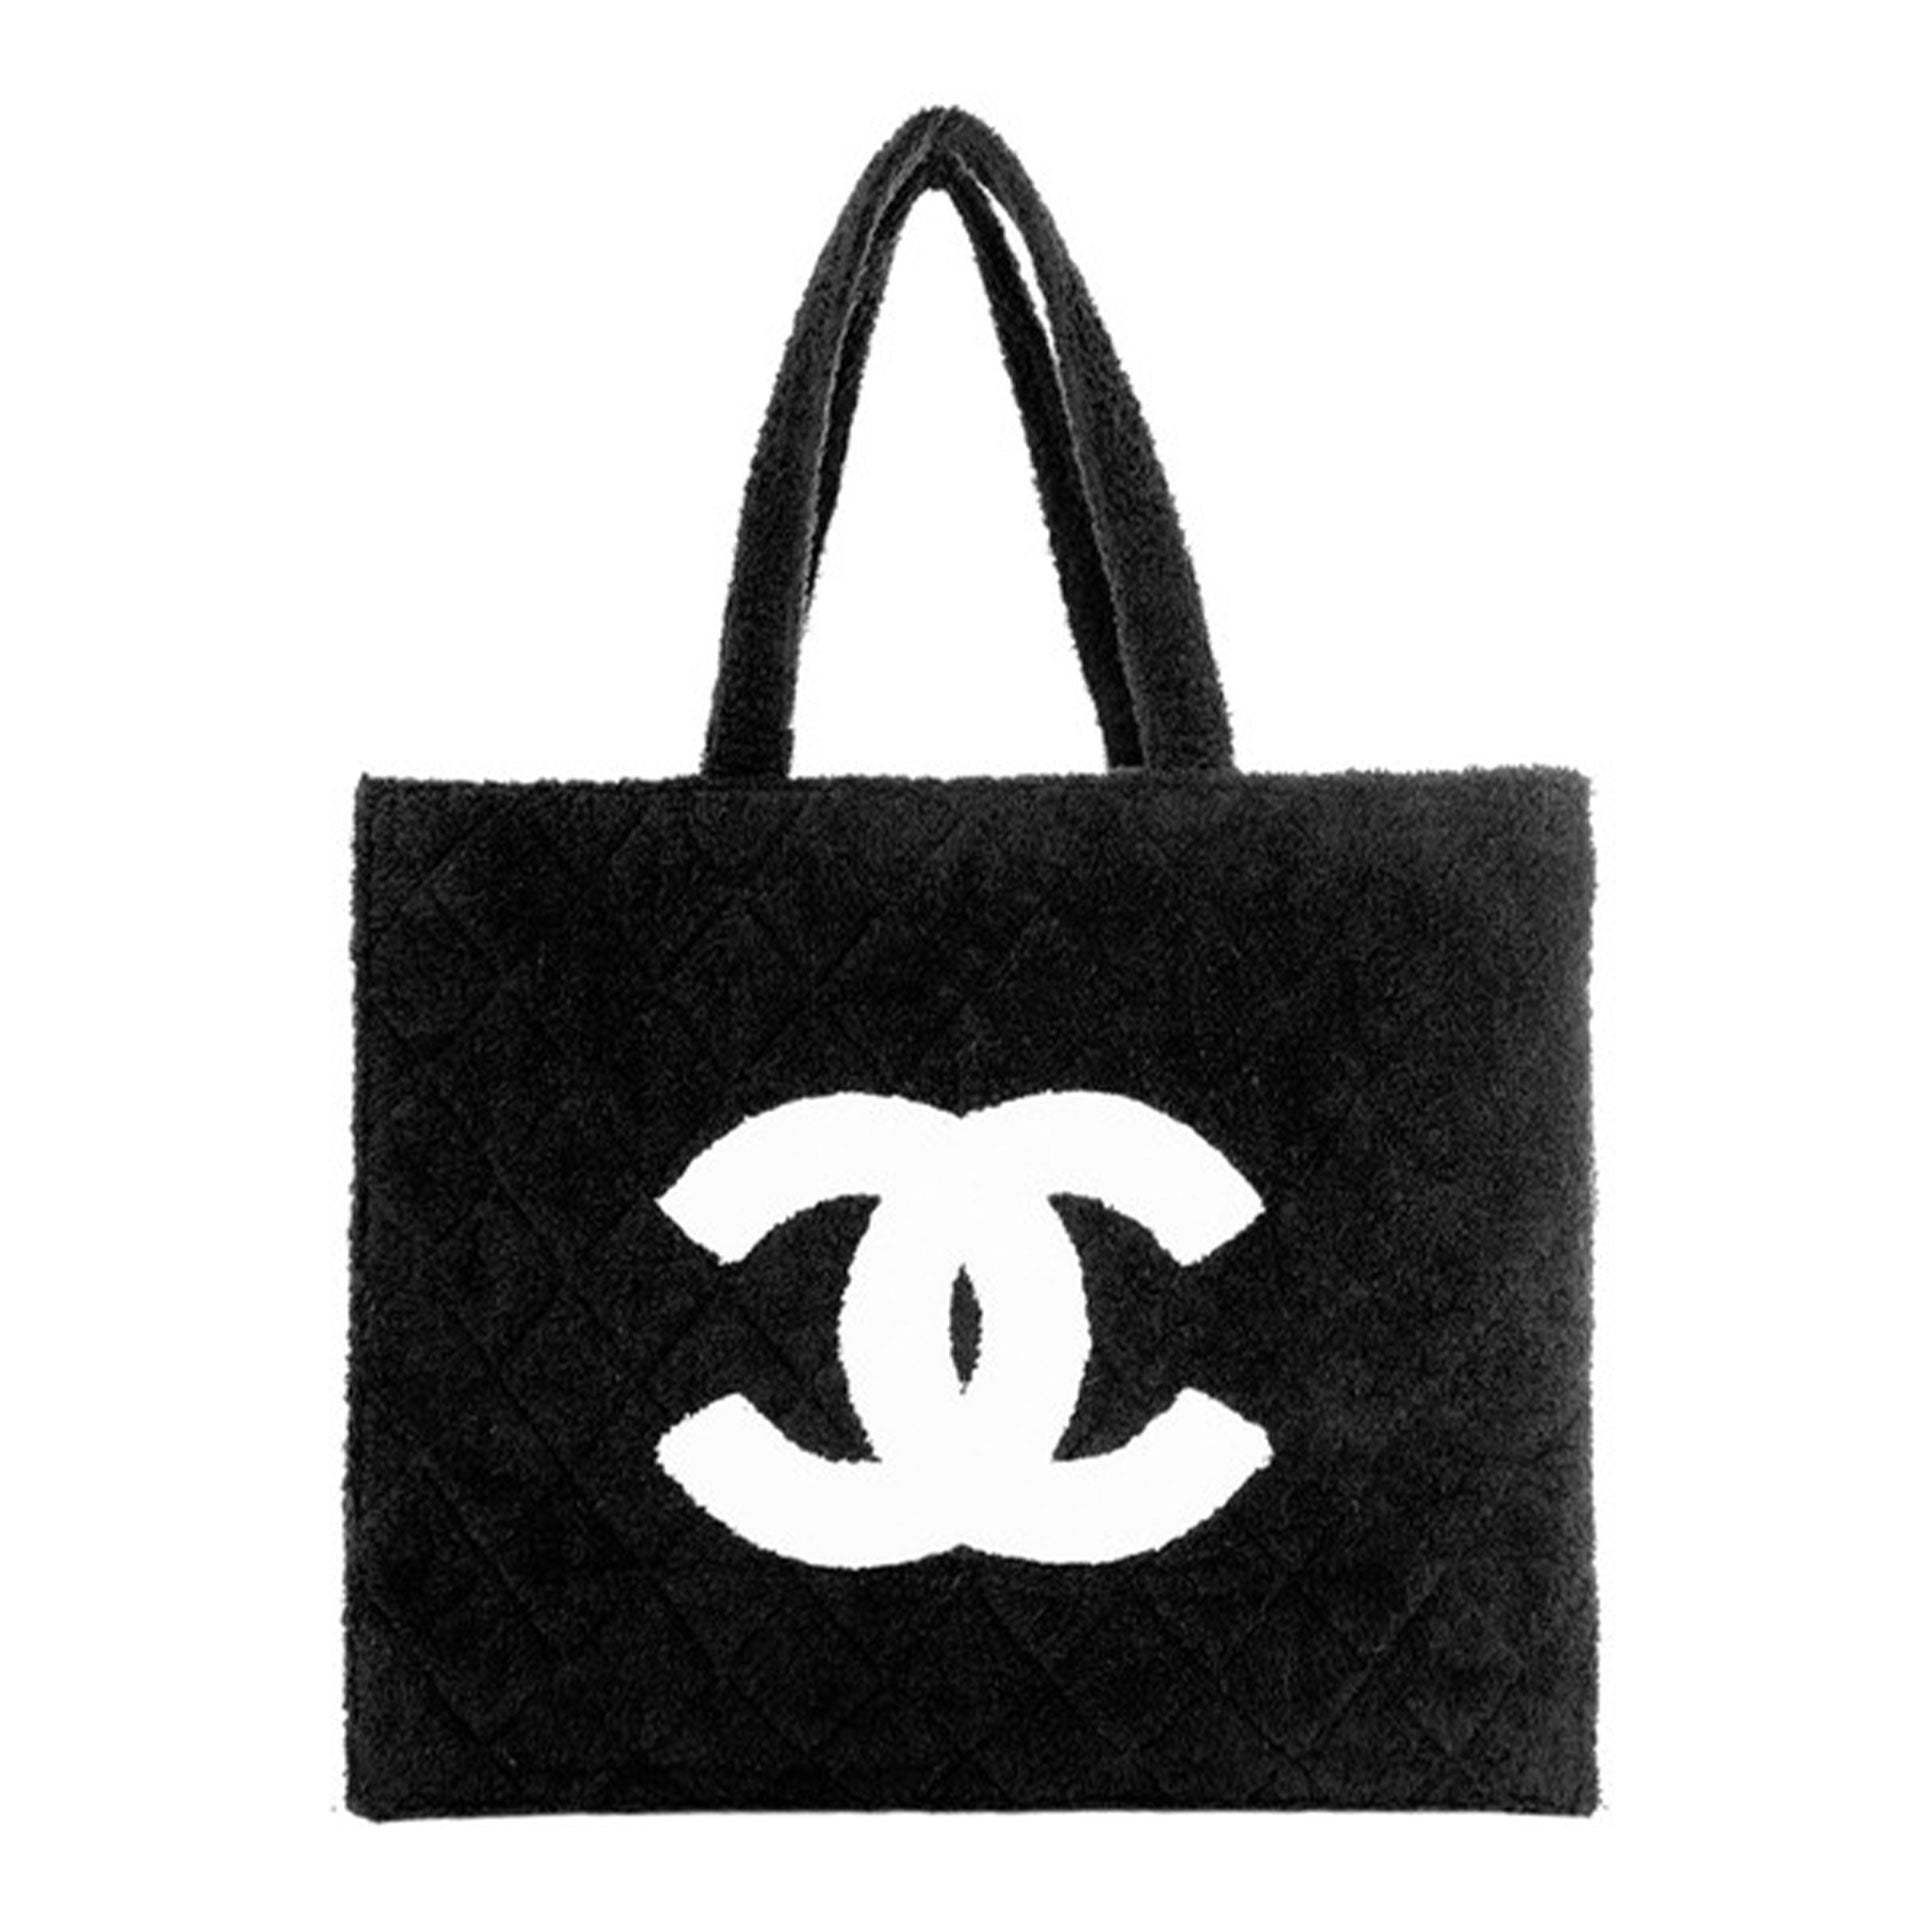 black and white chanel tote bag